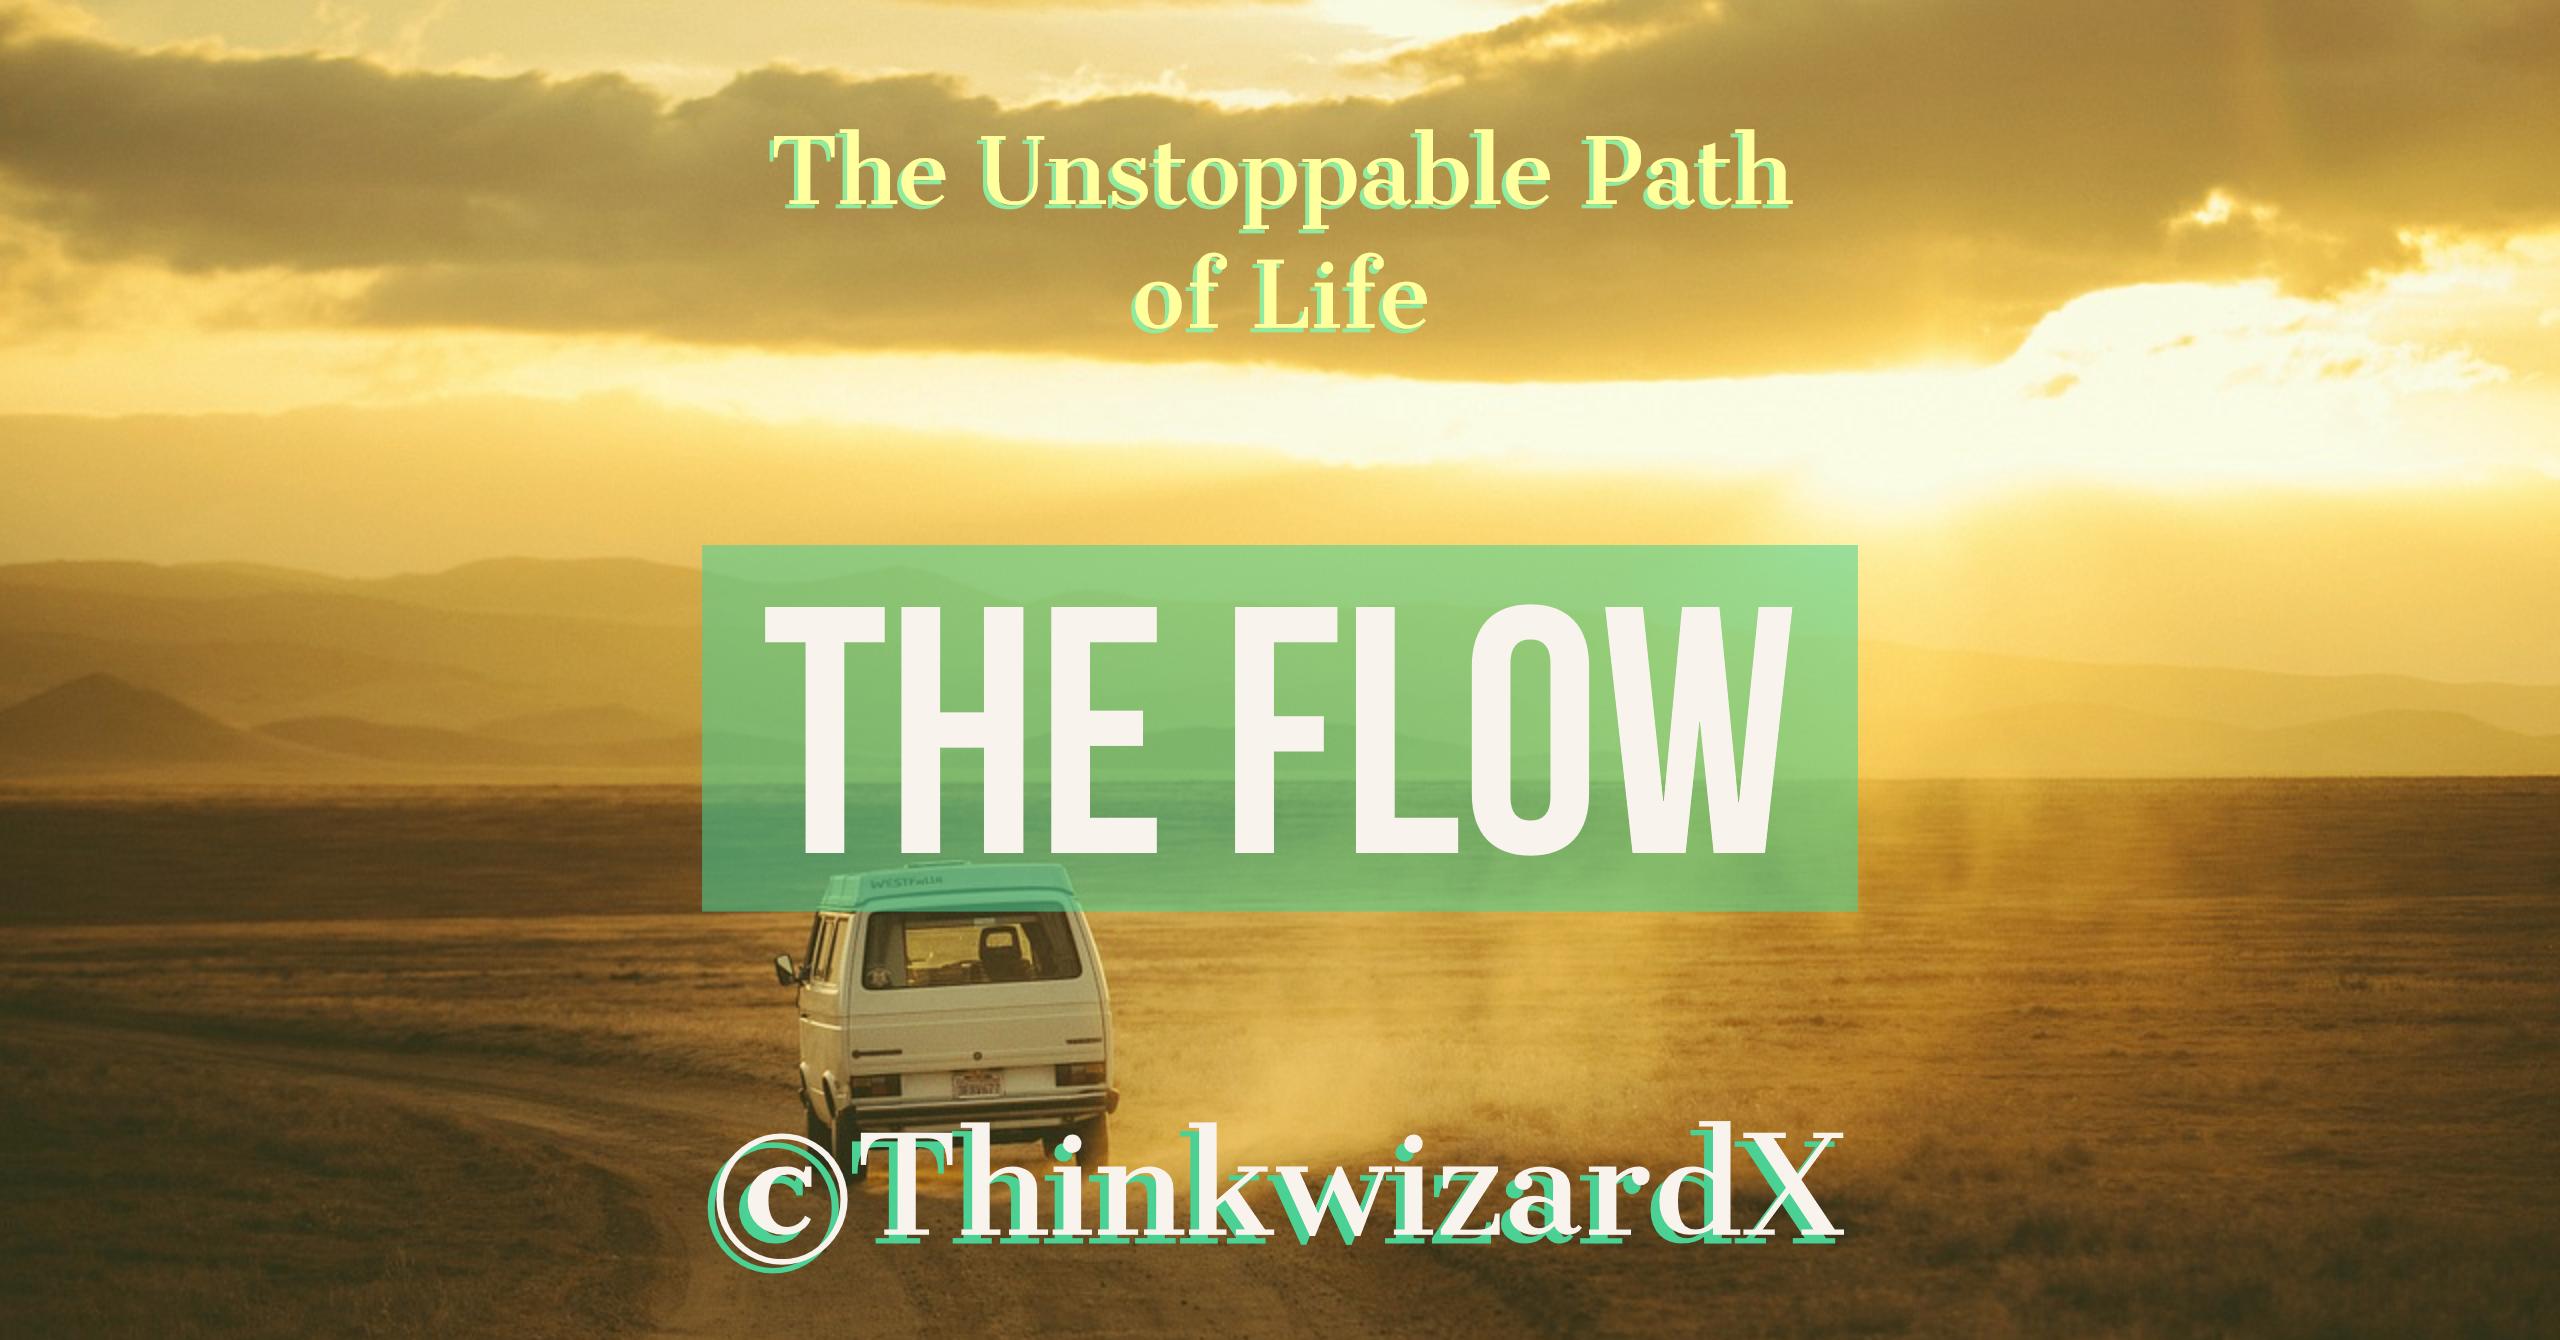 The Flow: The Unstoppable Path of Life | ThinkwizardX